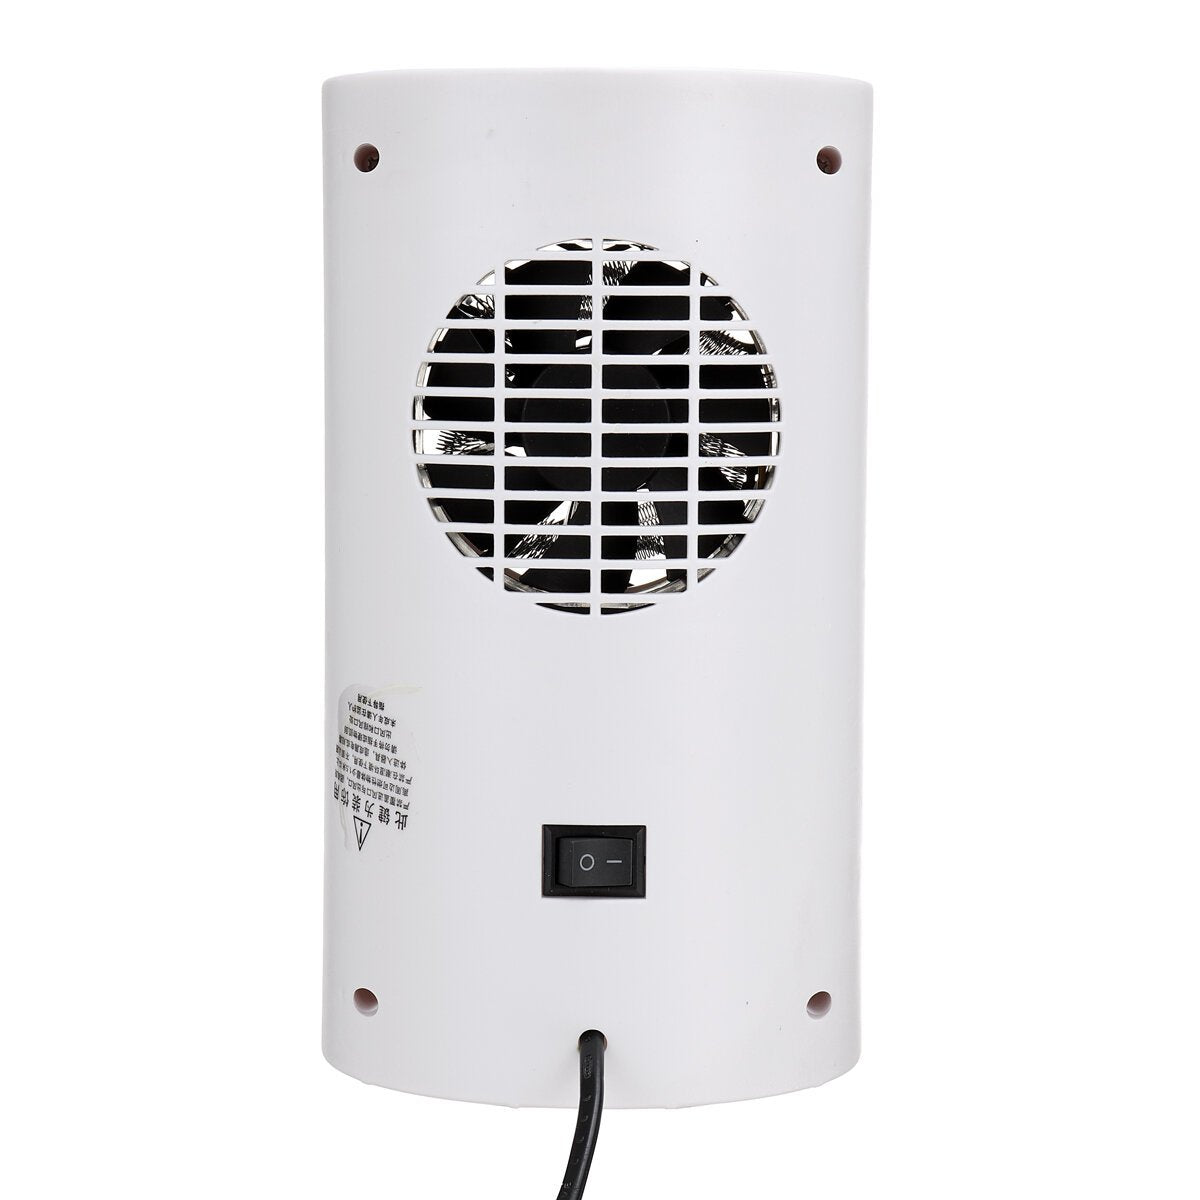 700W Electric Heater Warm Air Blower Mechanical Control Overheat Protection for Home Office Dorm 220V